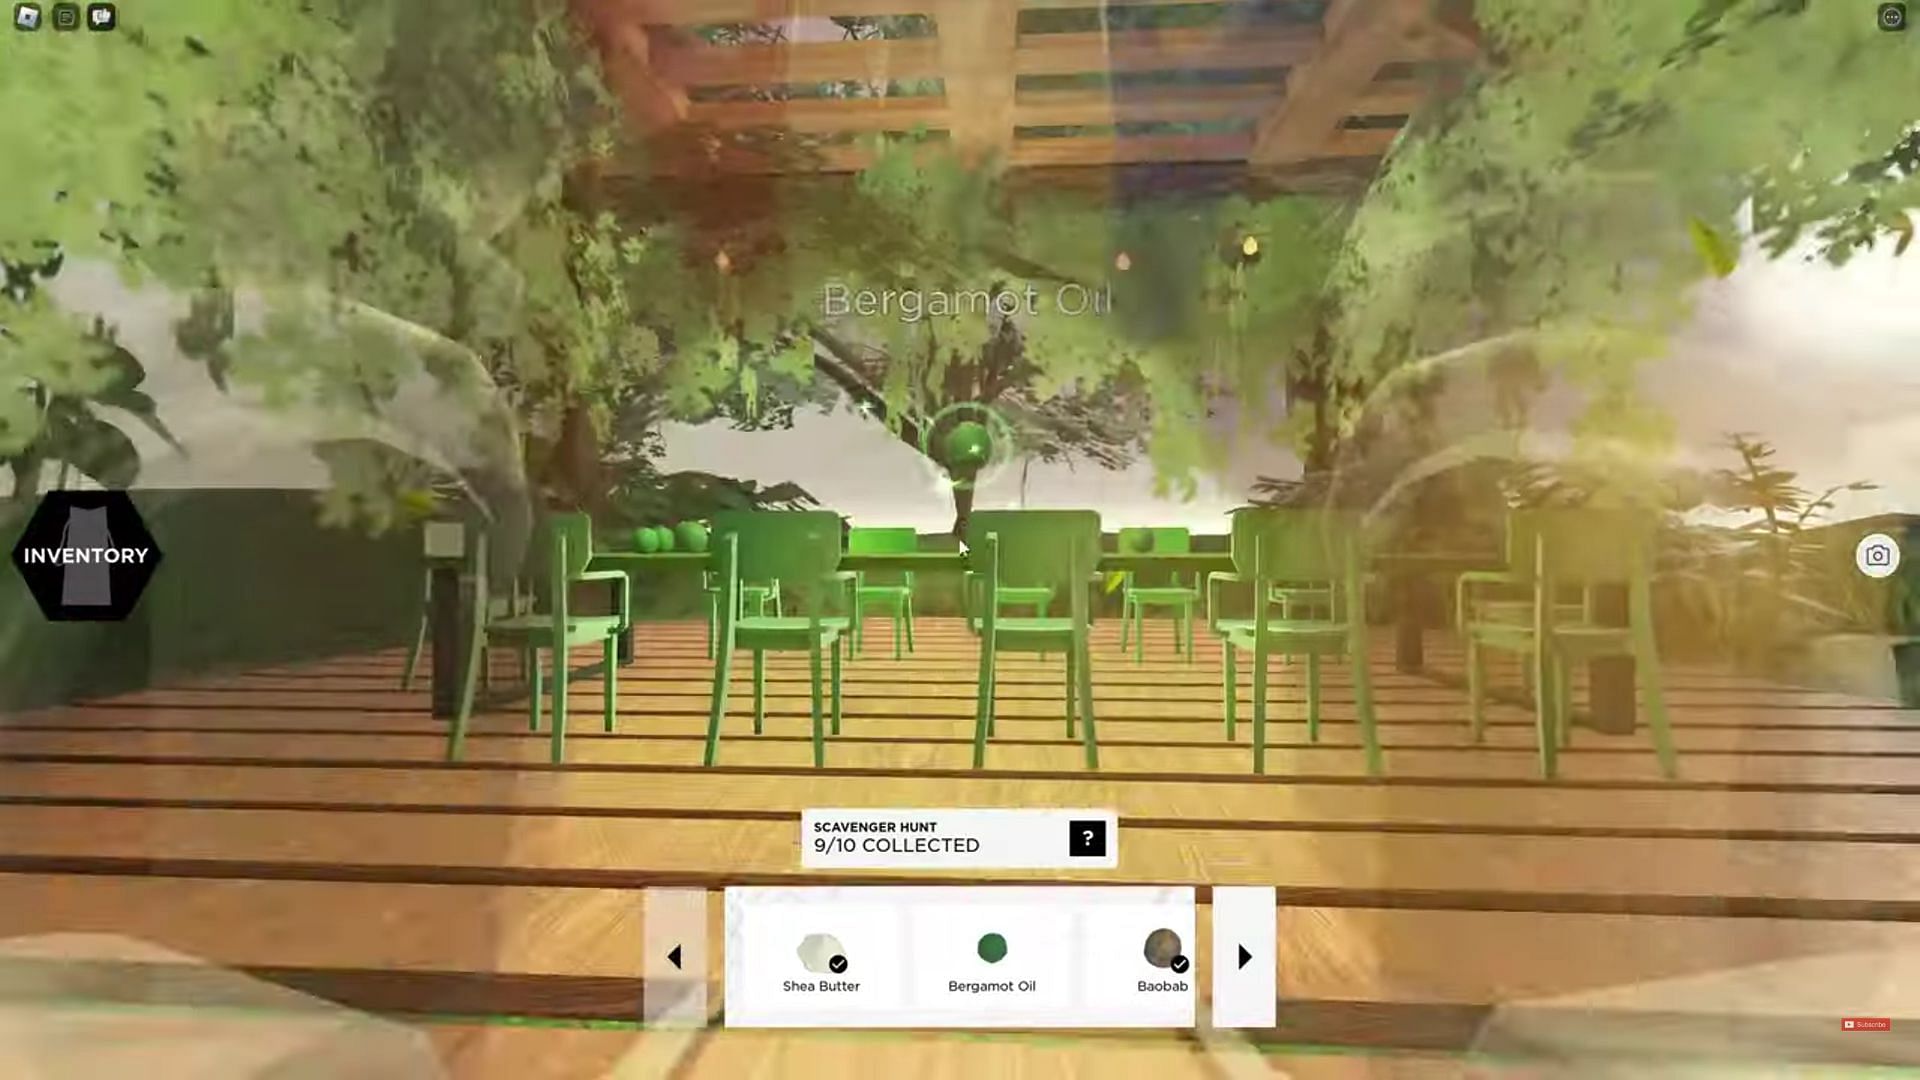 Bergamot Oil floating above the green table (Image via Conor3D/YouTube)